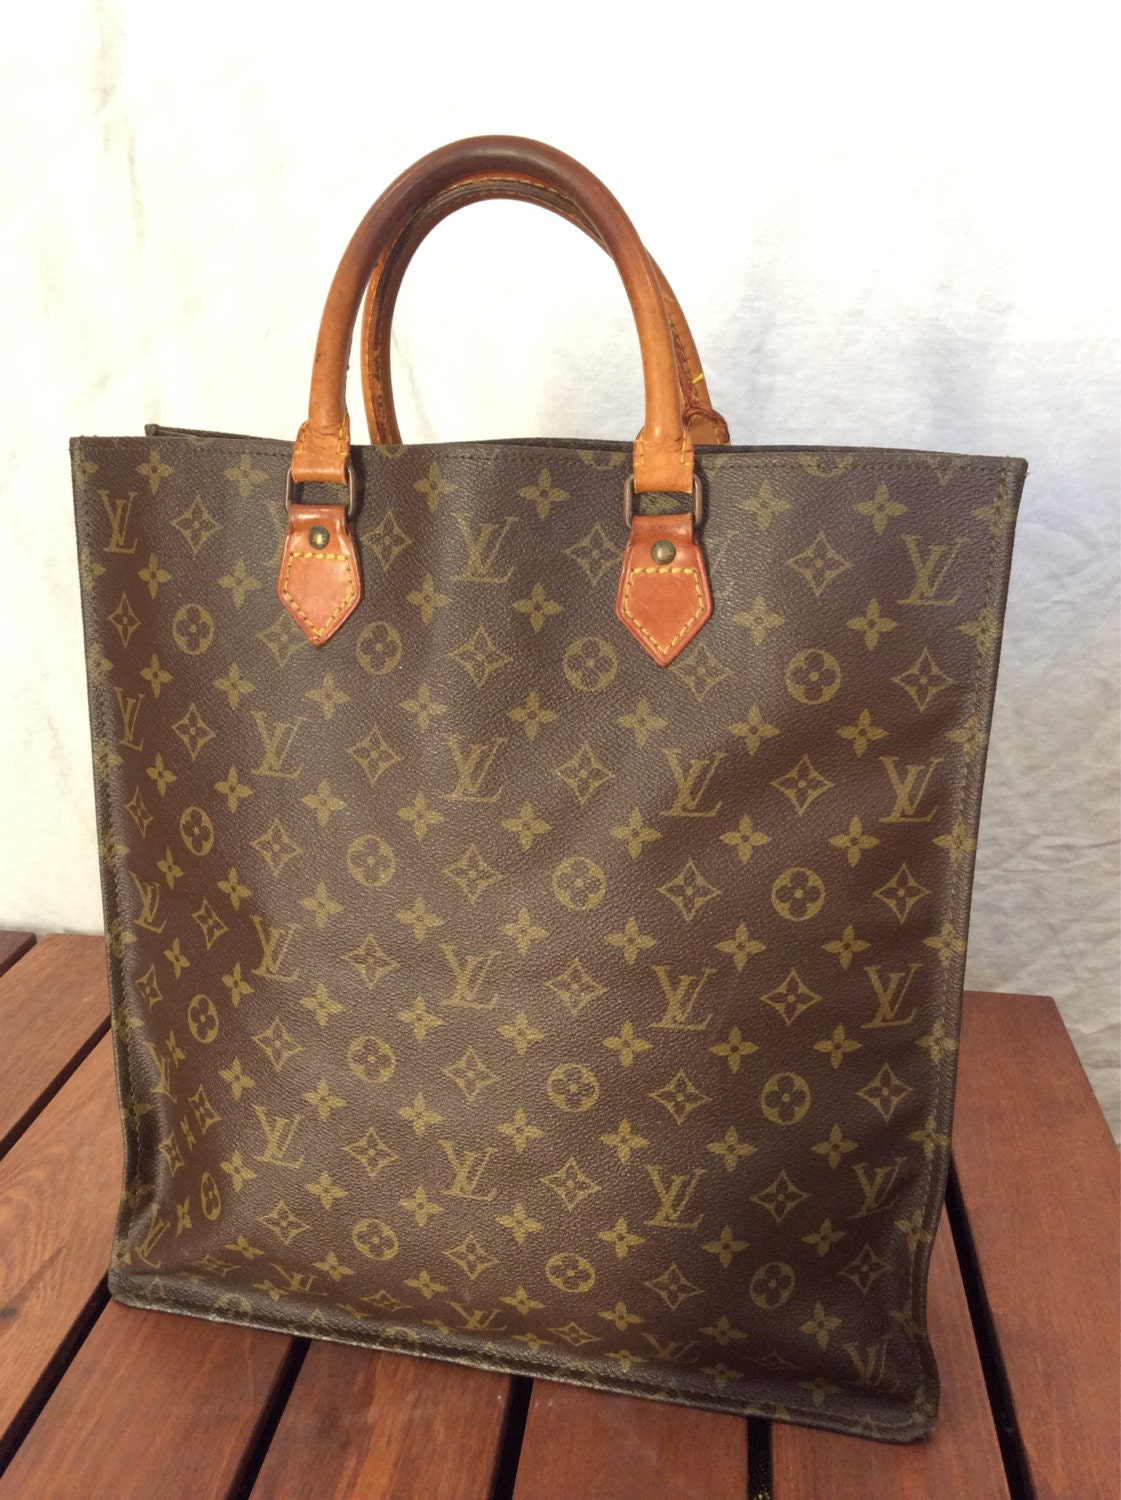 Louis Vuitton Box [BIG] - Hobby & Collectibles for sale in